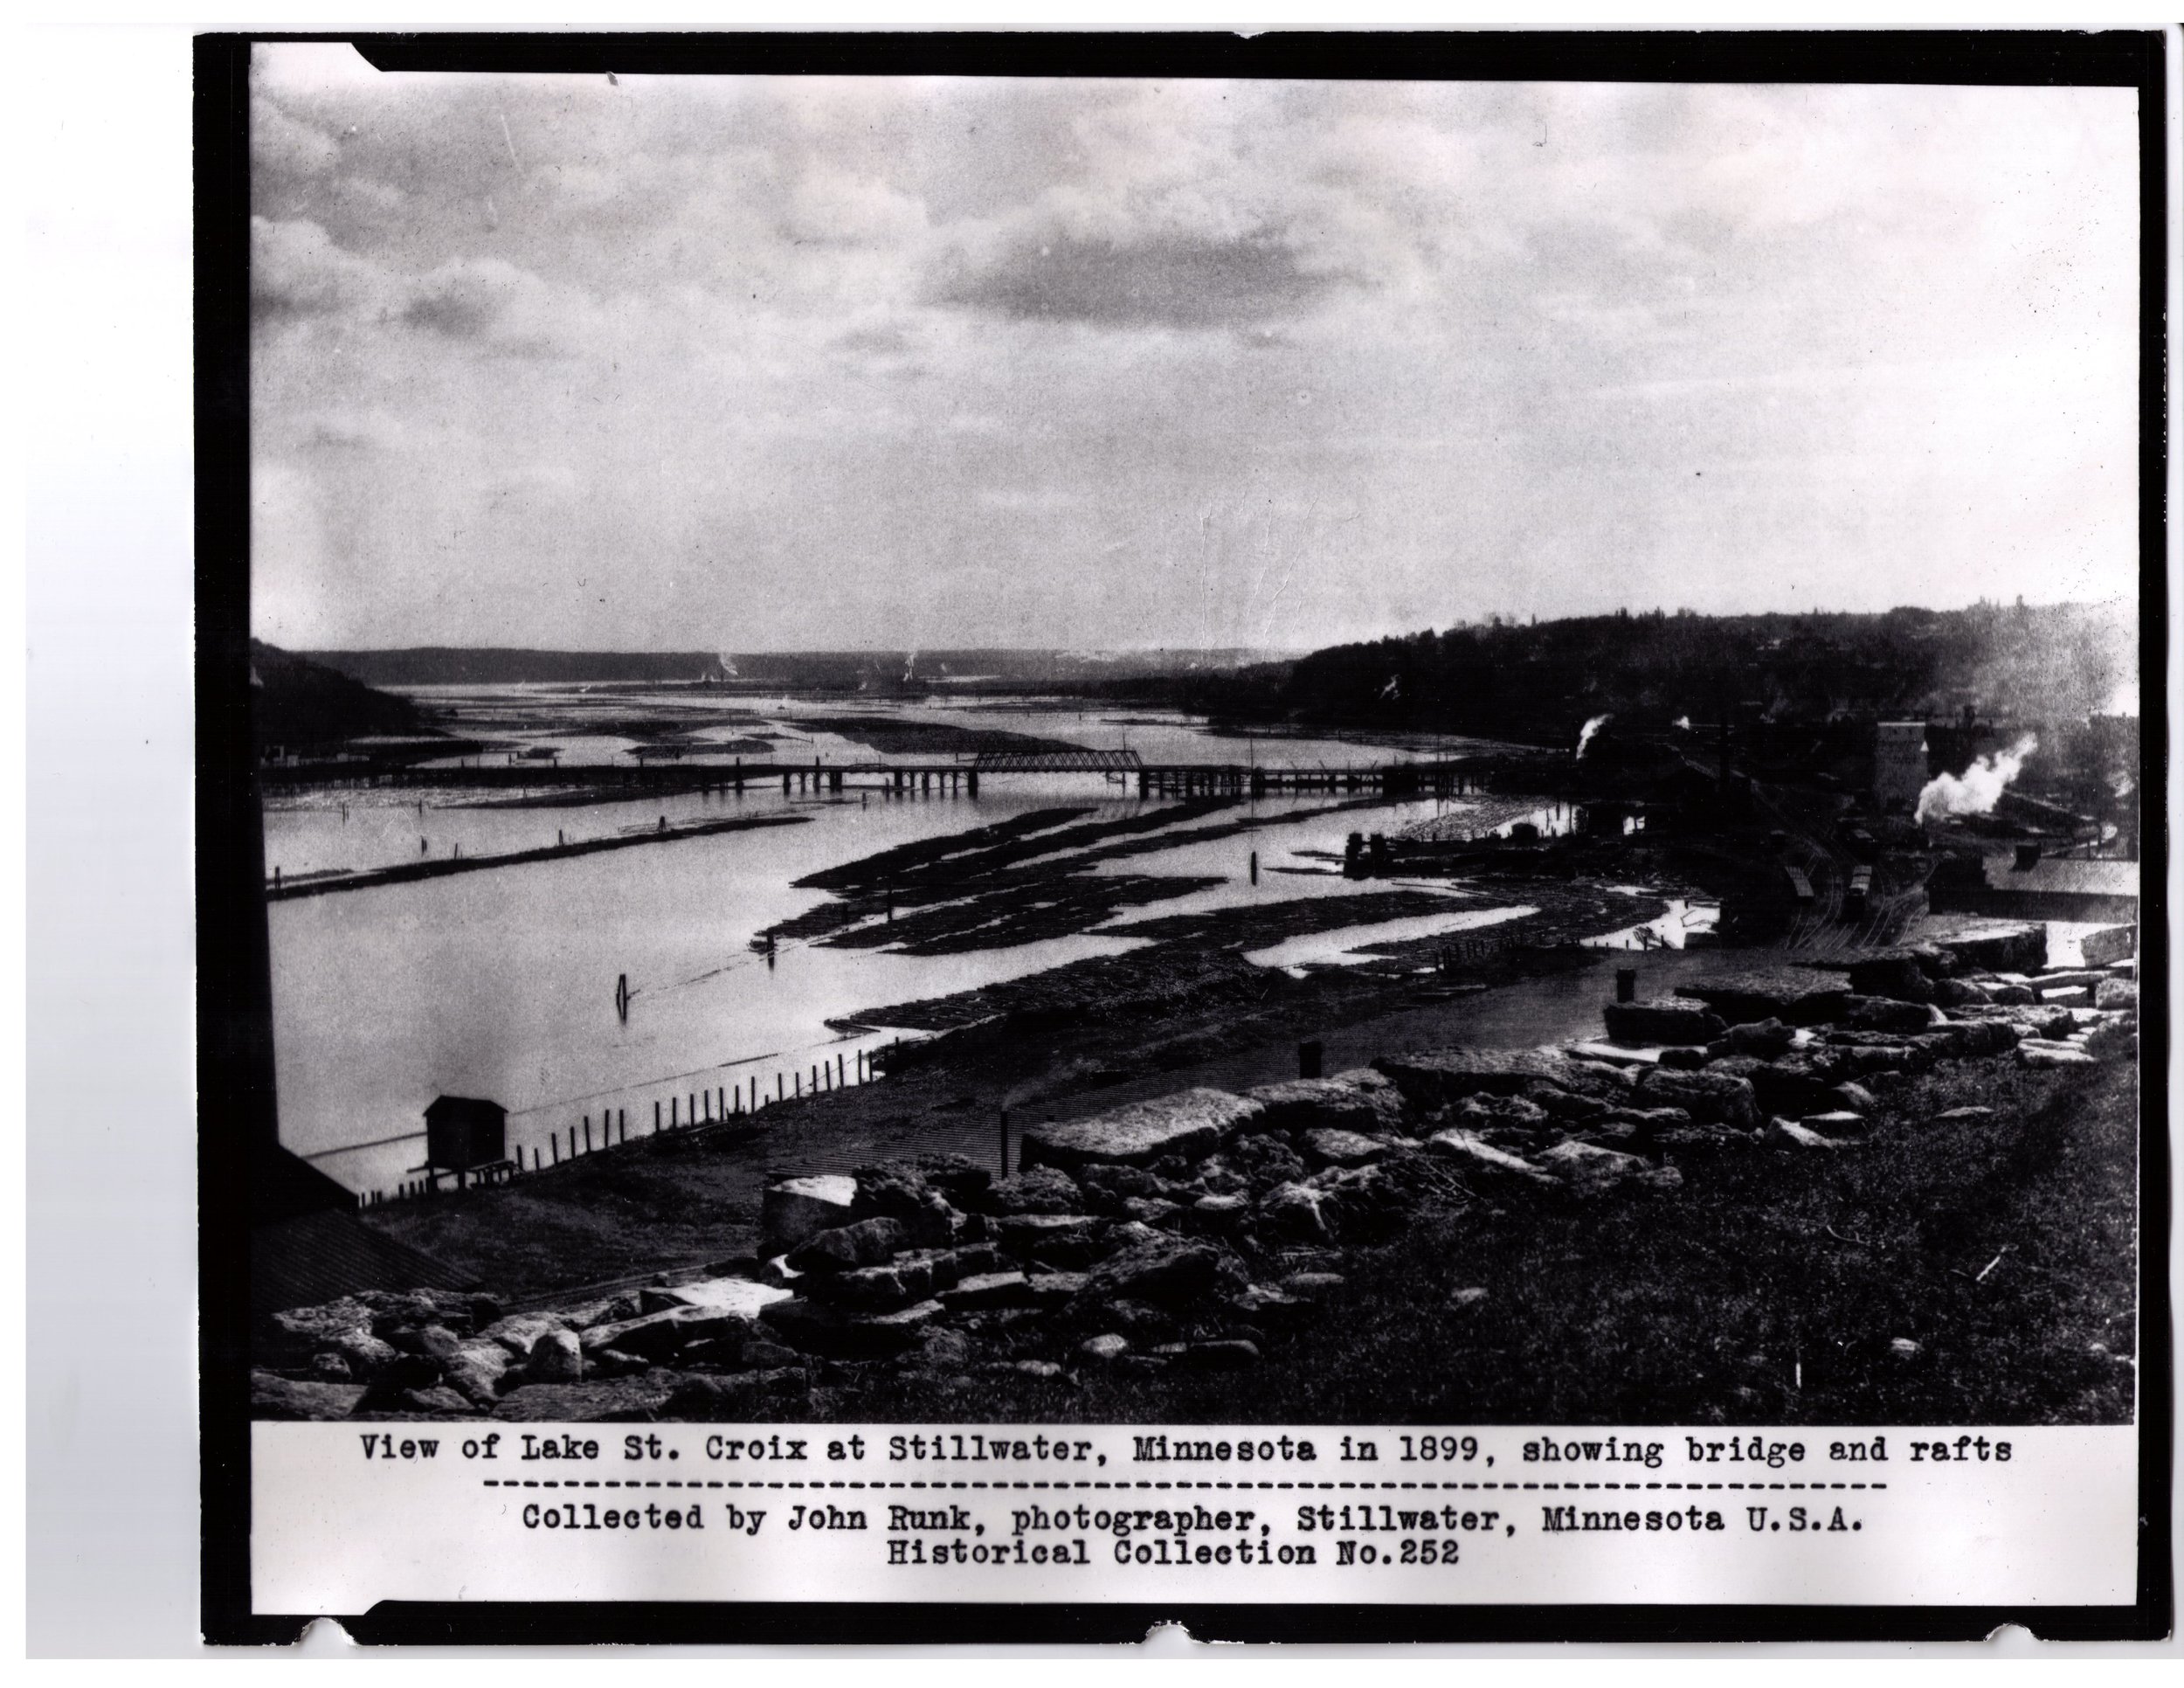 3-10 View of old bridge to South 1899 copy.jpg